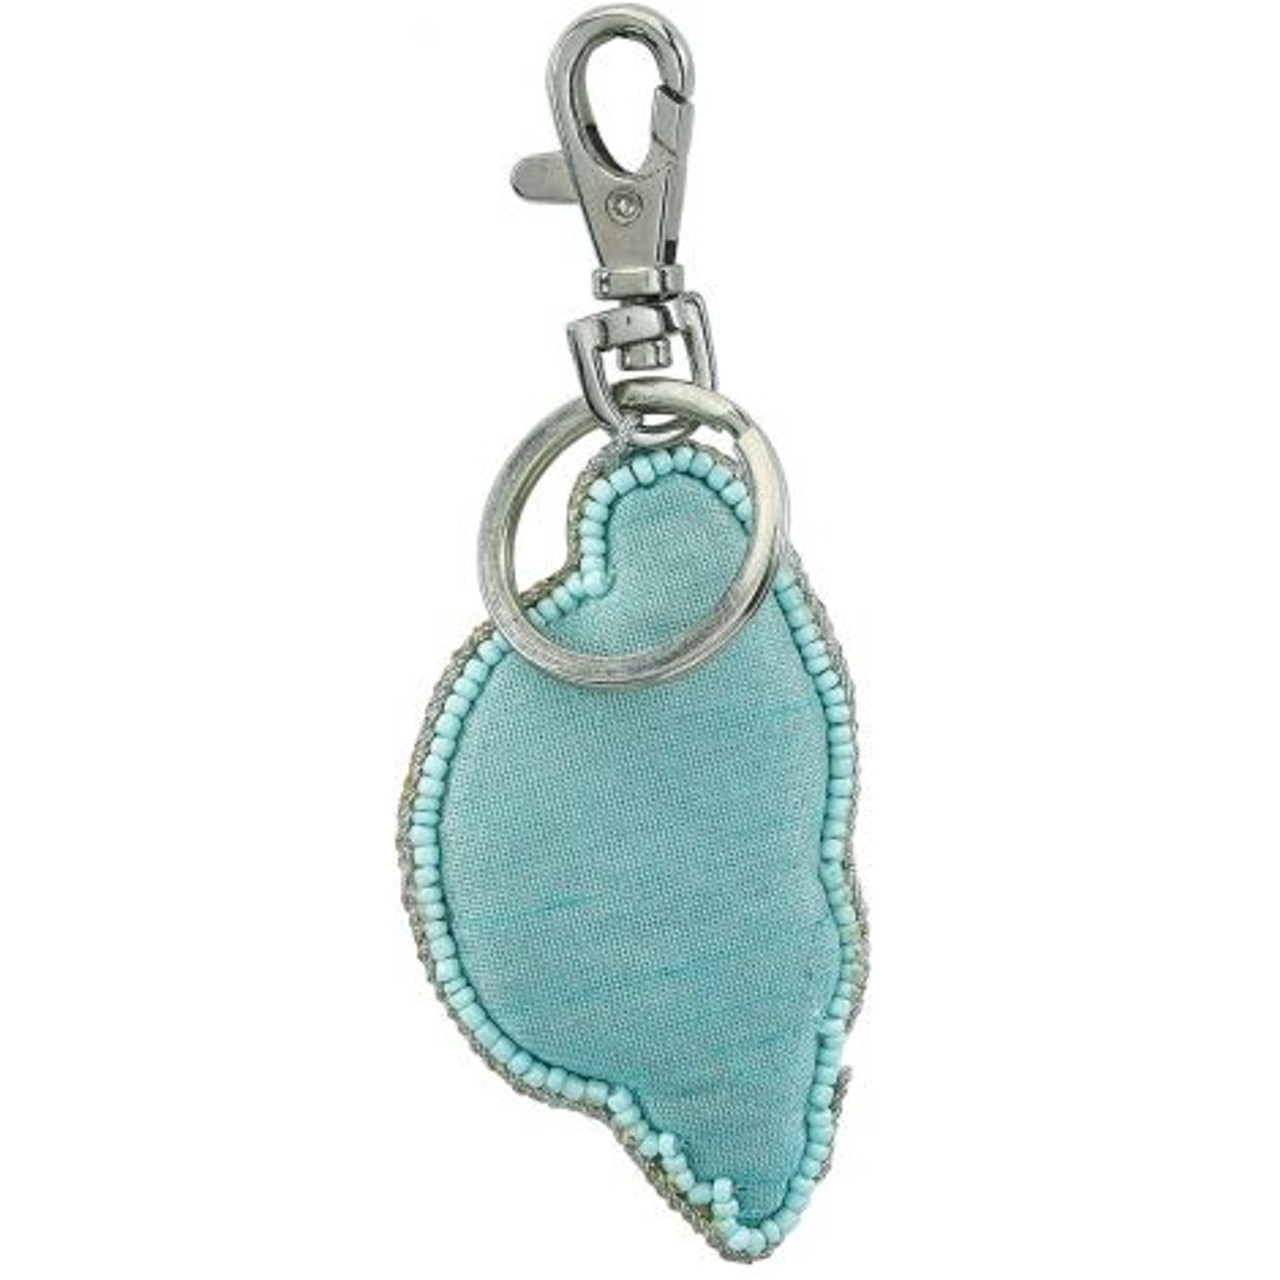 Blue Triton Key Ring - Mother of Pearl & Beads - 3" - Back